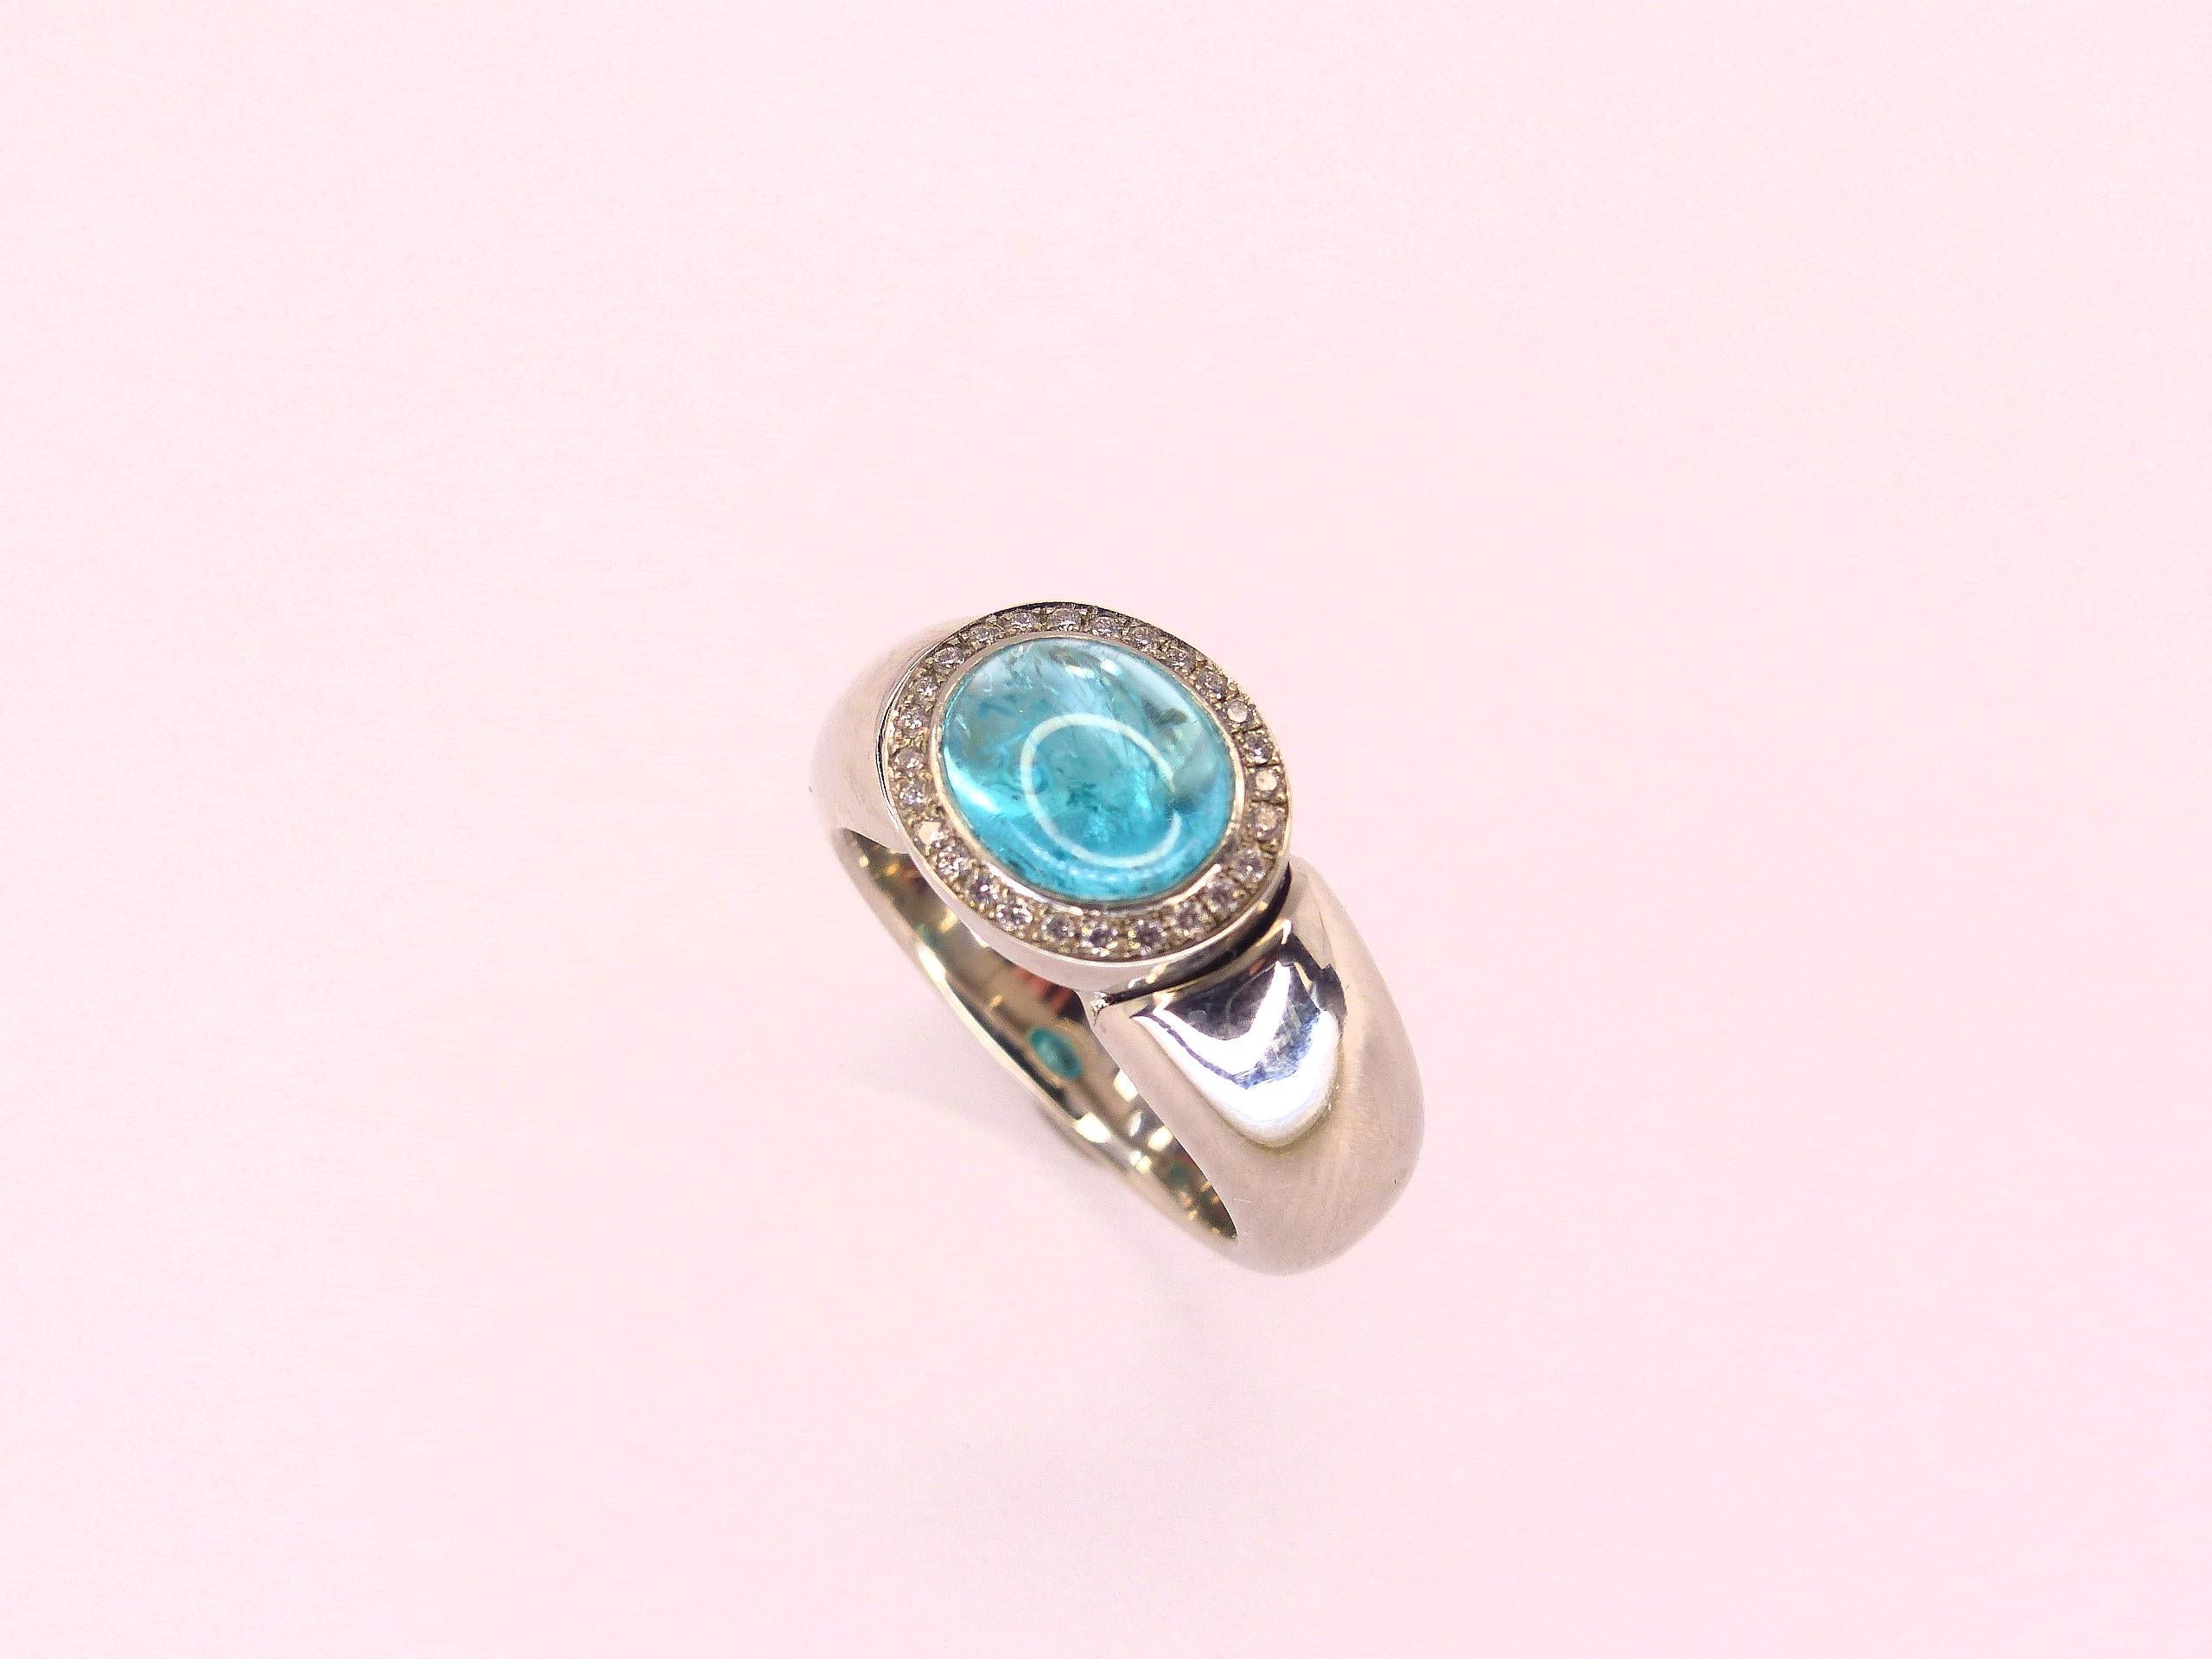 This 950/Platinum ring is set with 1x fine Paraiba Tourmaline Cabouchon in greenish/blueish color (